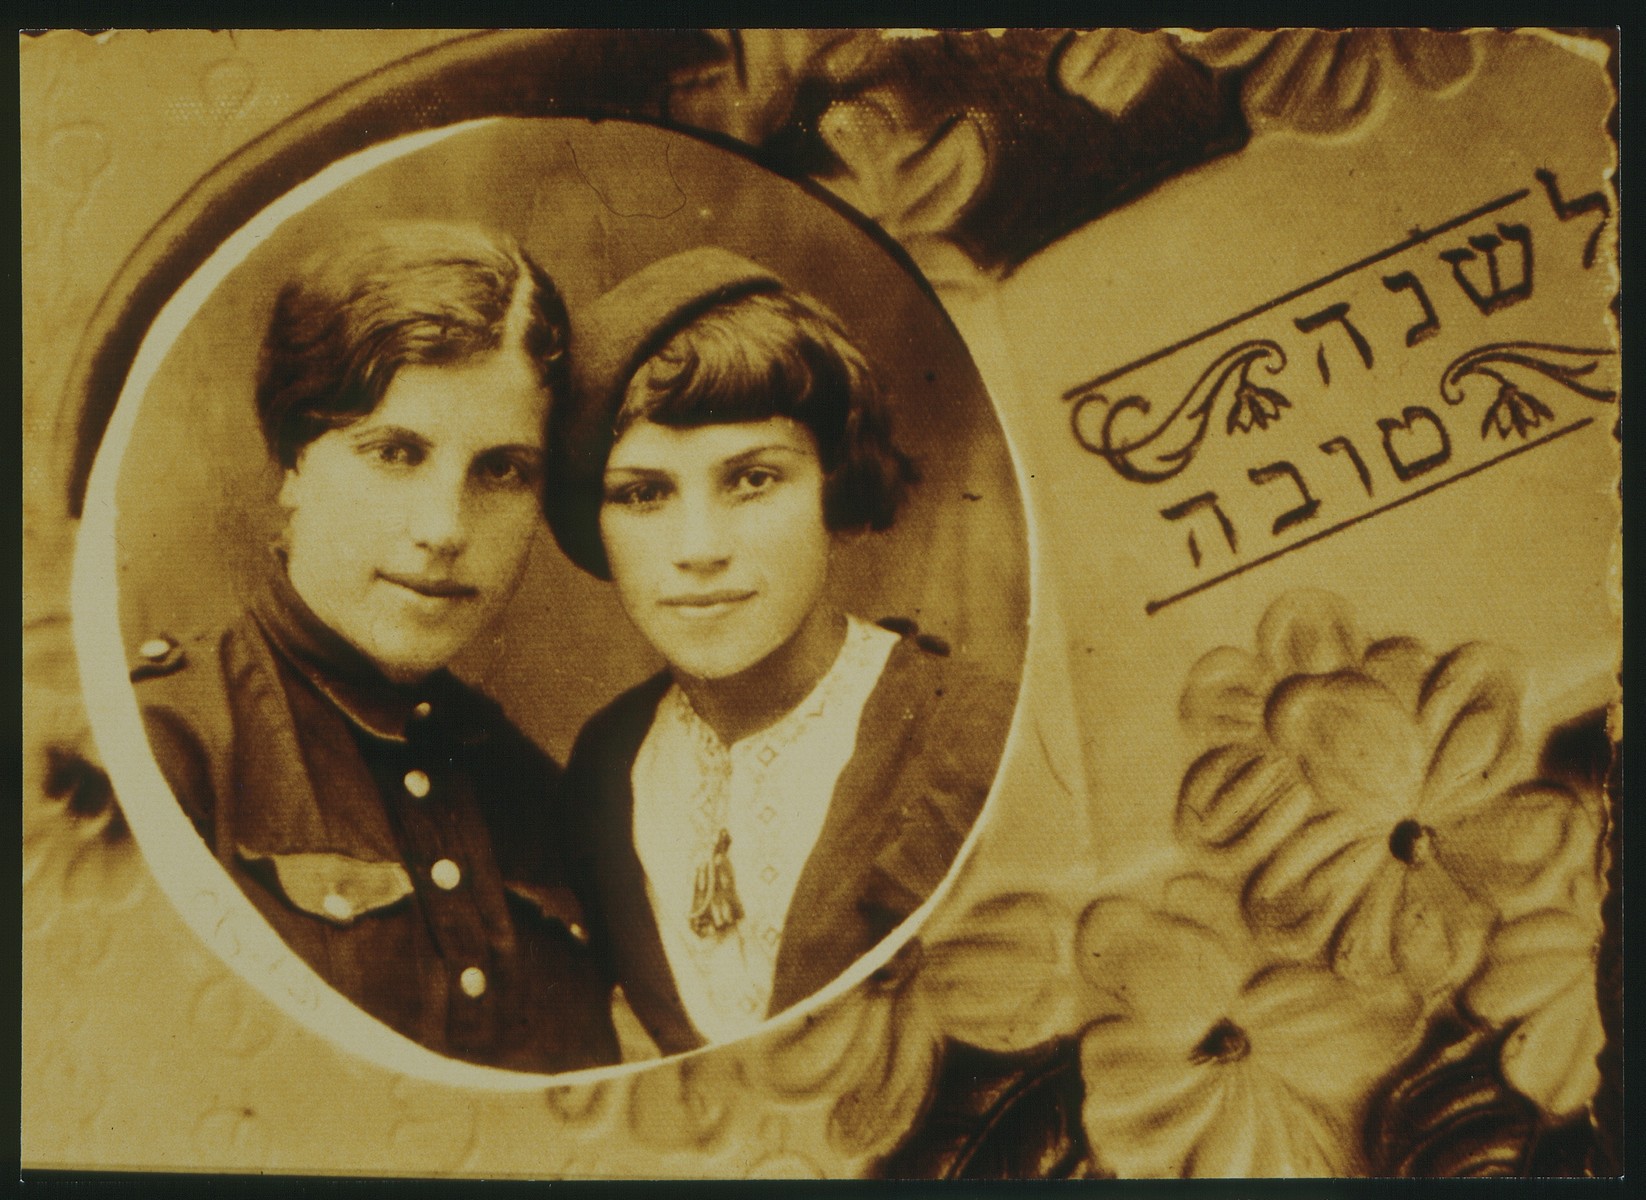 A Jewish New Year's card from the Hinski sisters of Eisiskes.

Pictured are Golda Brahah (left) and sister Hayya Sheine Hinski. Hayya-Sheine died a natural death during the summer of 1940. Her sister was murdered by the Germans during the September 1941 killing action in Eisiskes.